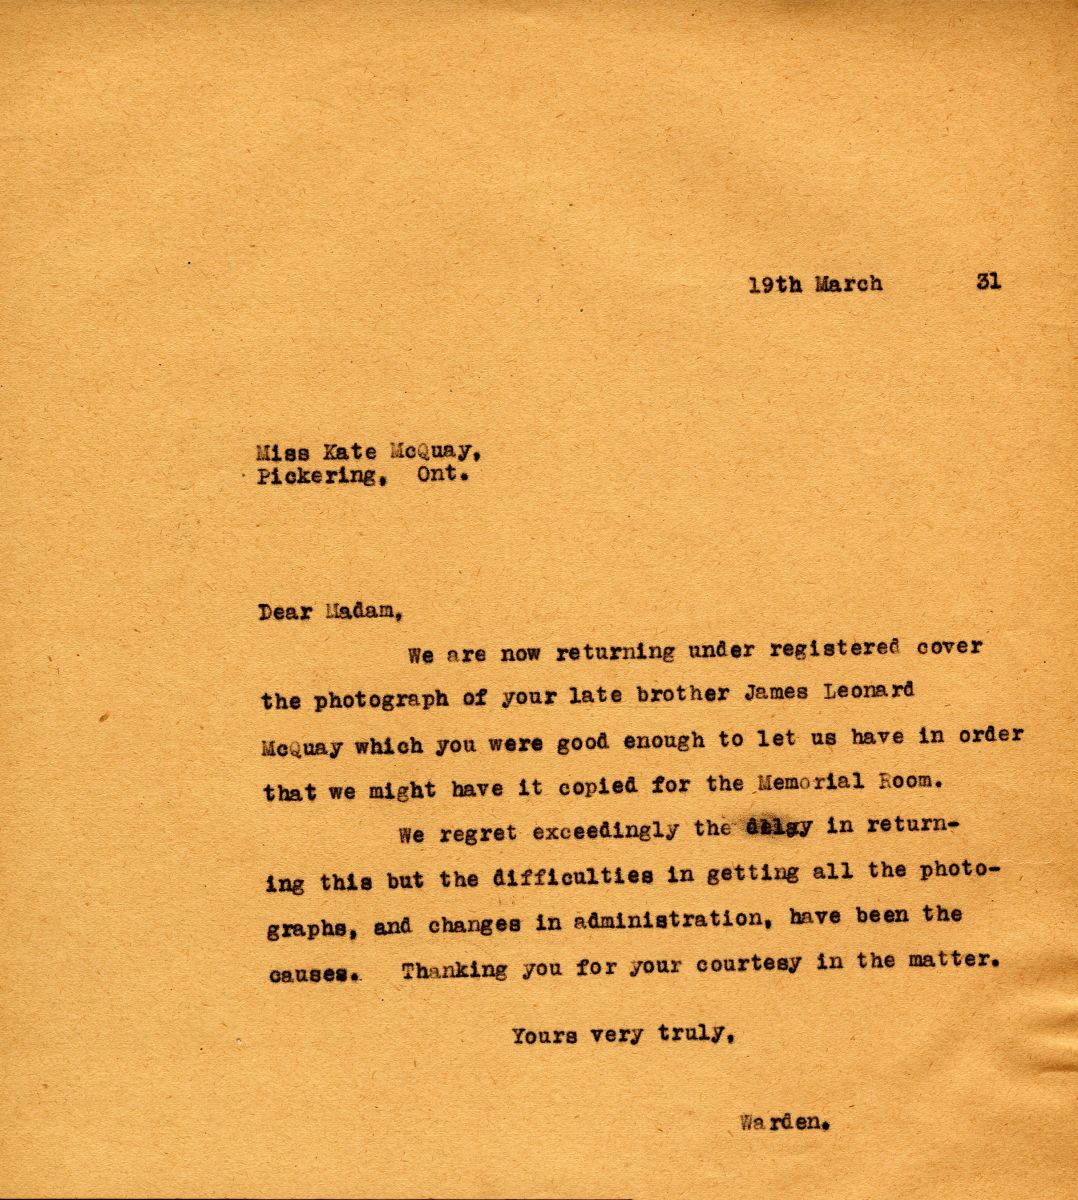 Letter from the Warden to Miss Kate McQuay, 19th March 1931